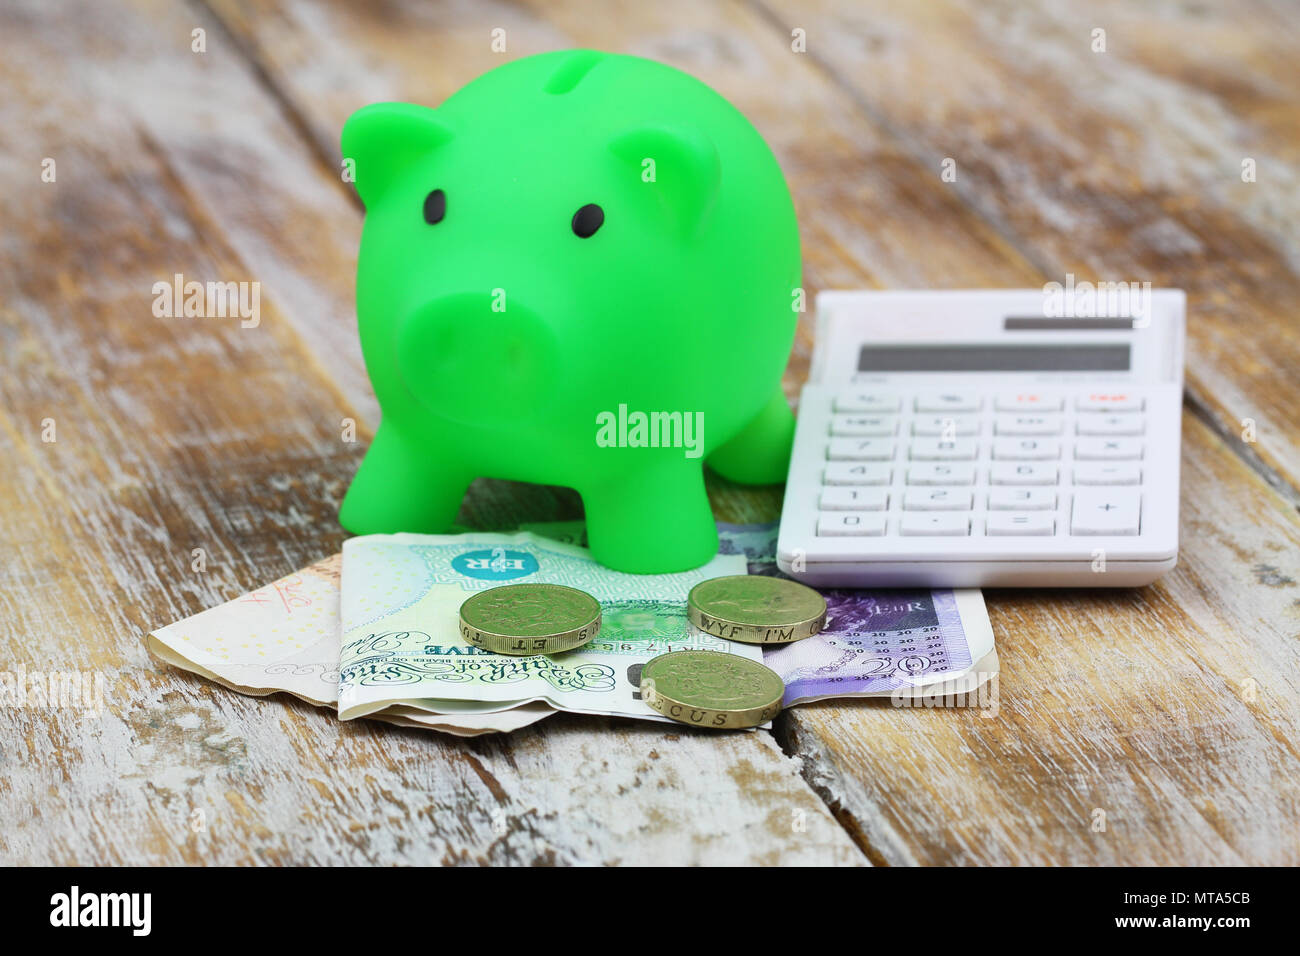 British banknotes and coins, piggy bank and calculator on rustic wooden surface Stock Photo